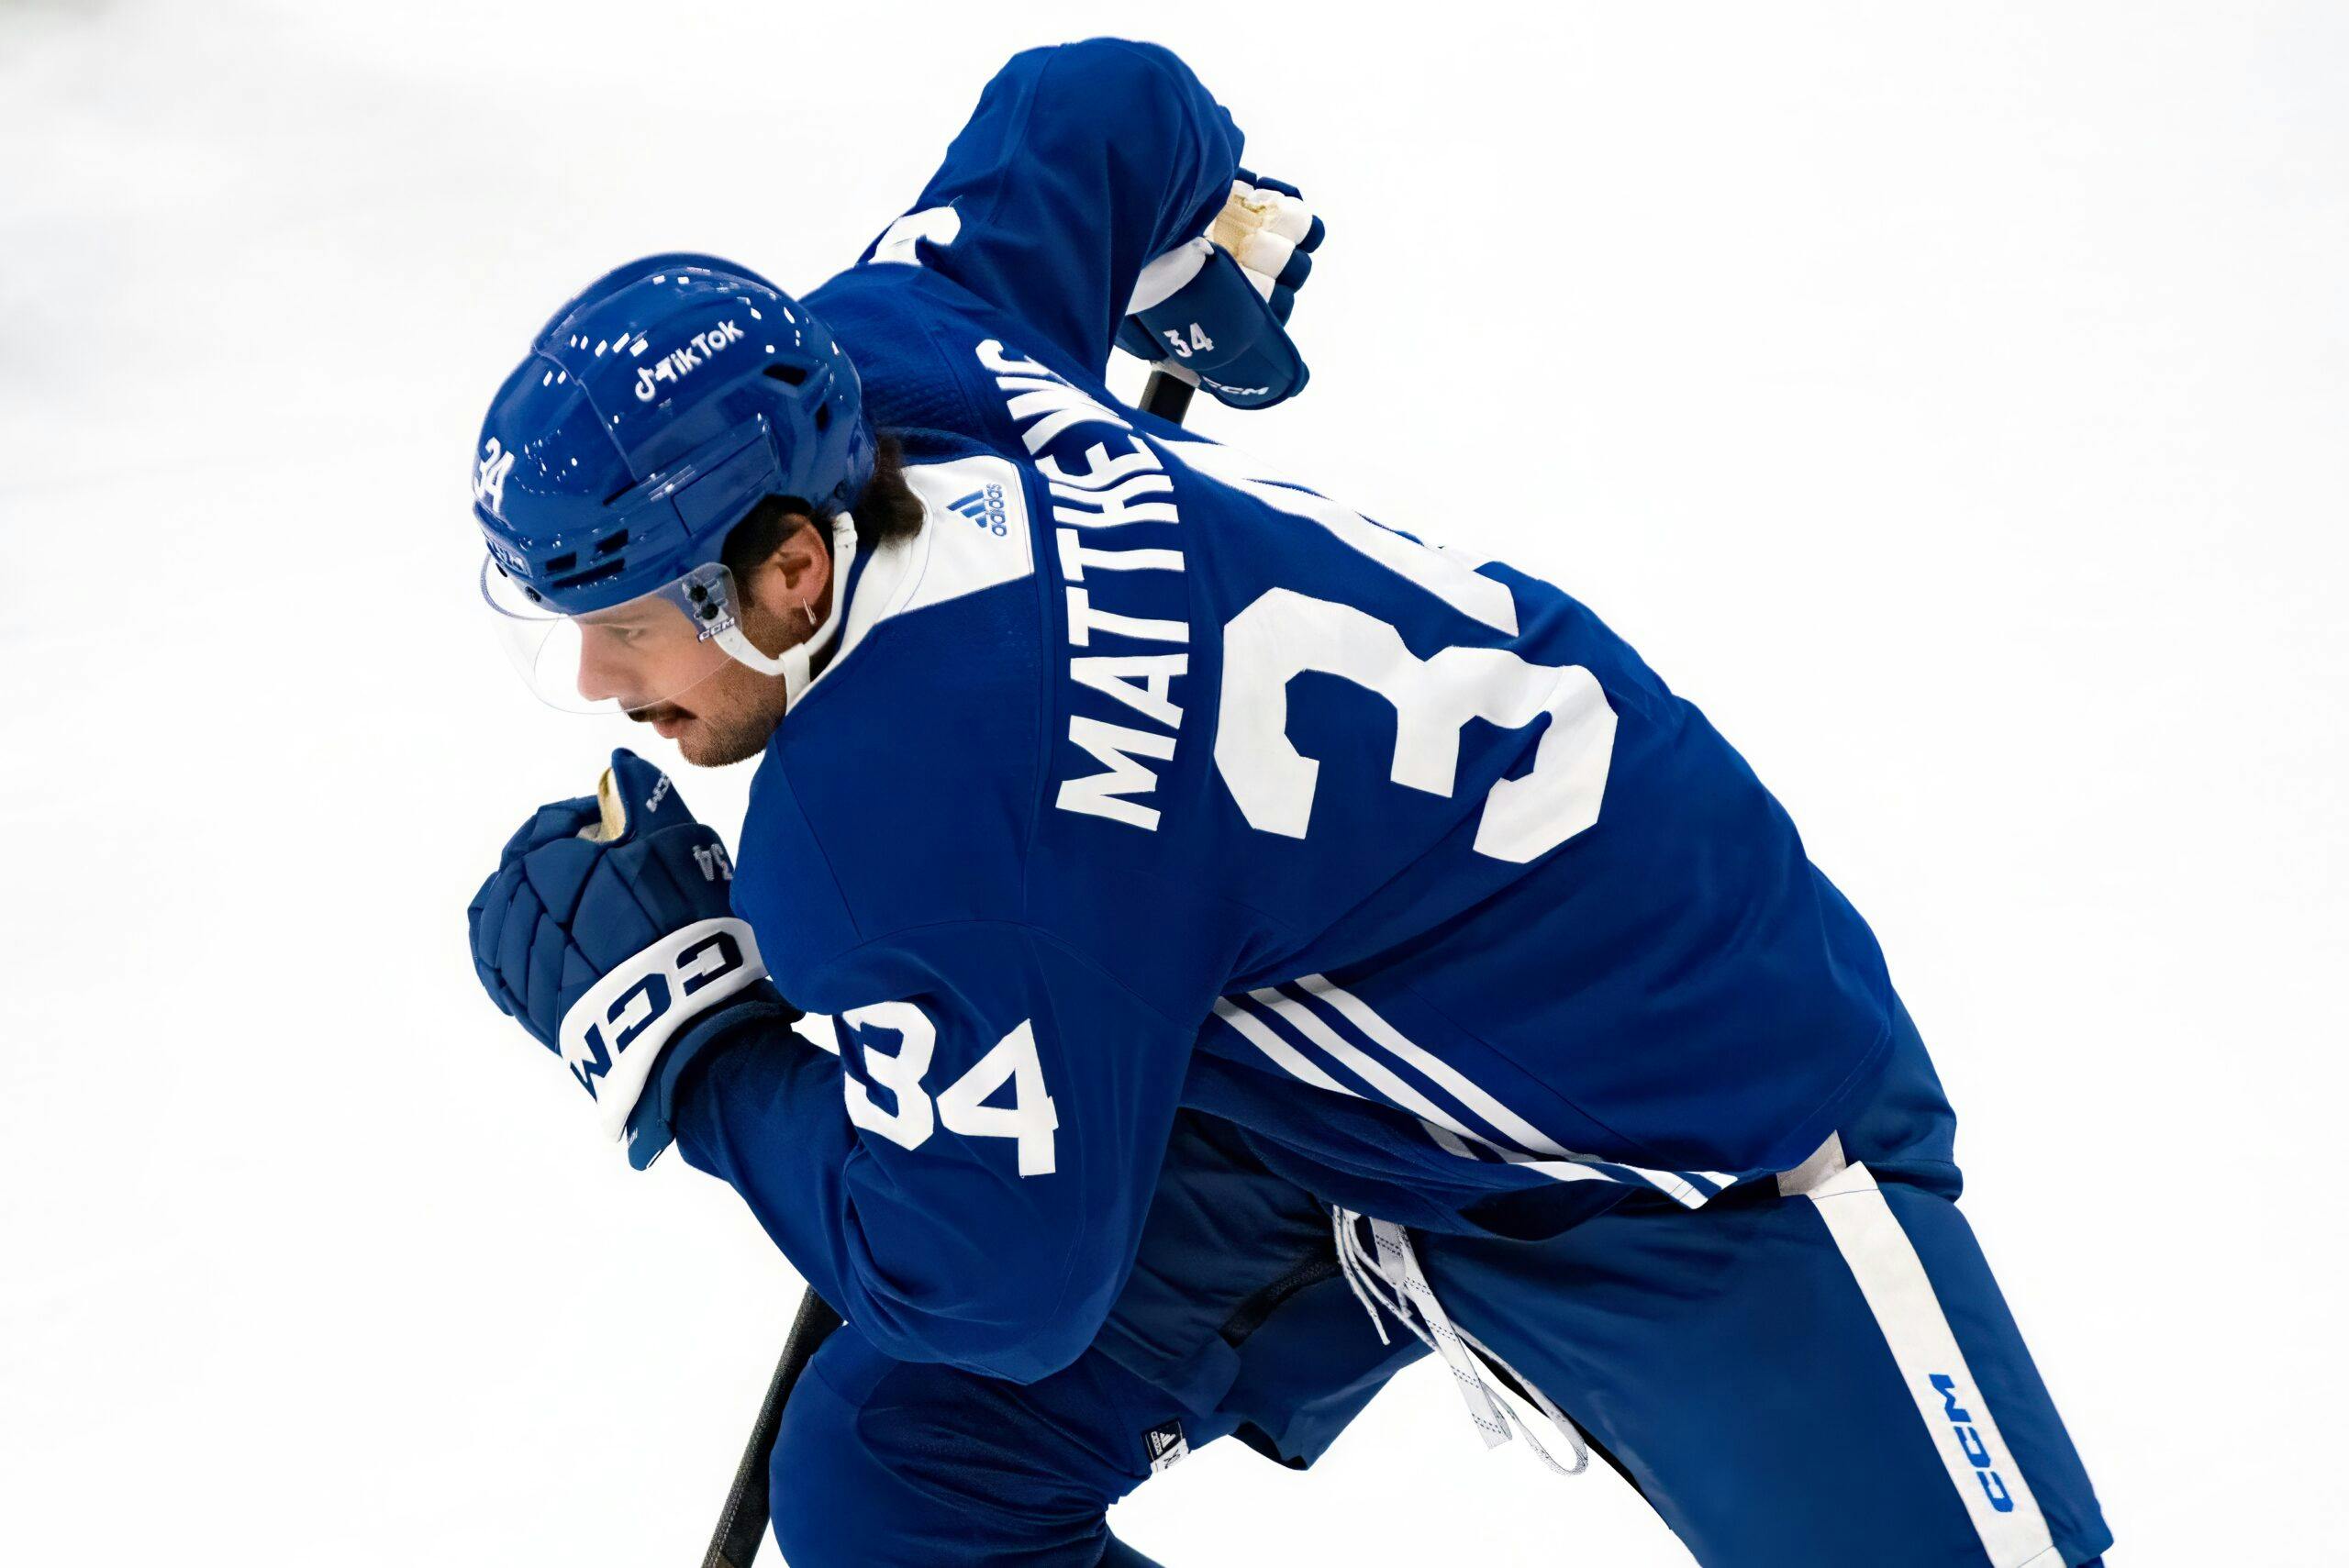 Auston Matthews' rookie season shaping up to be special